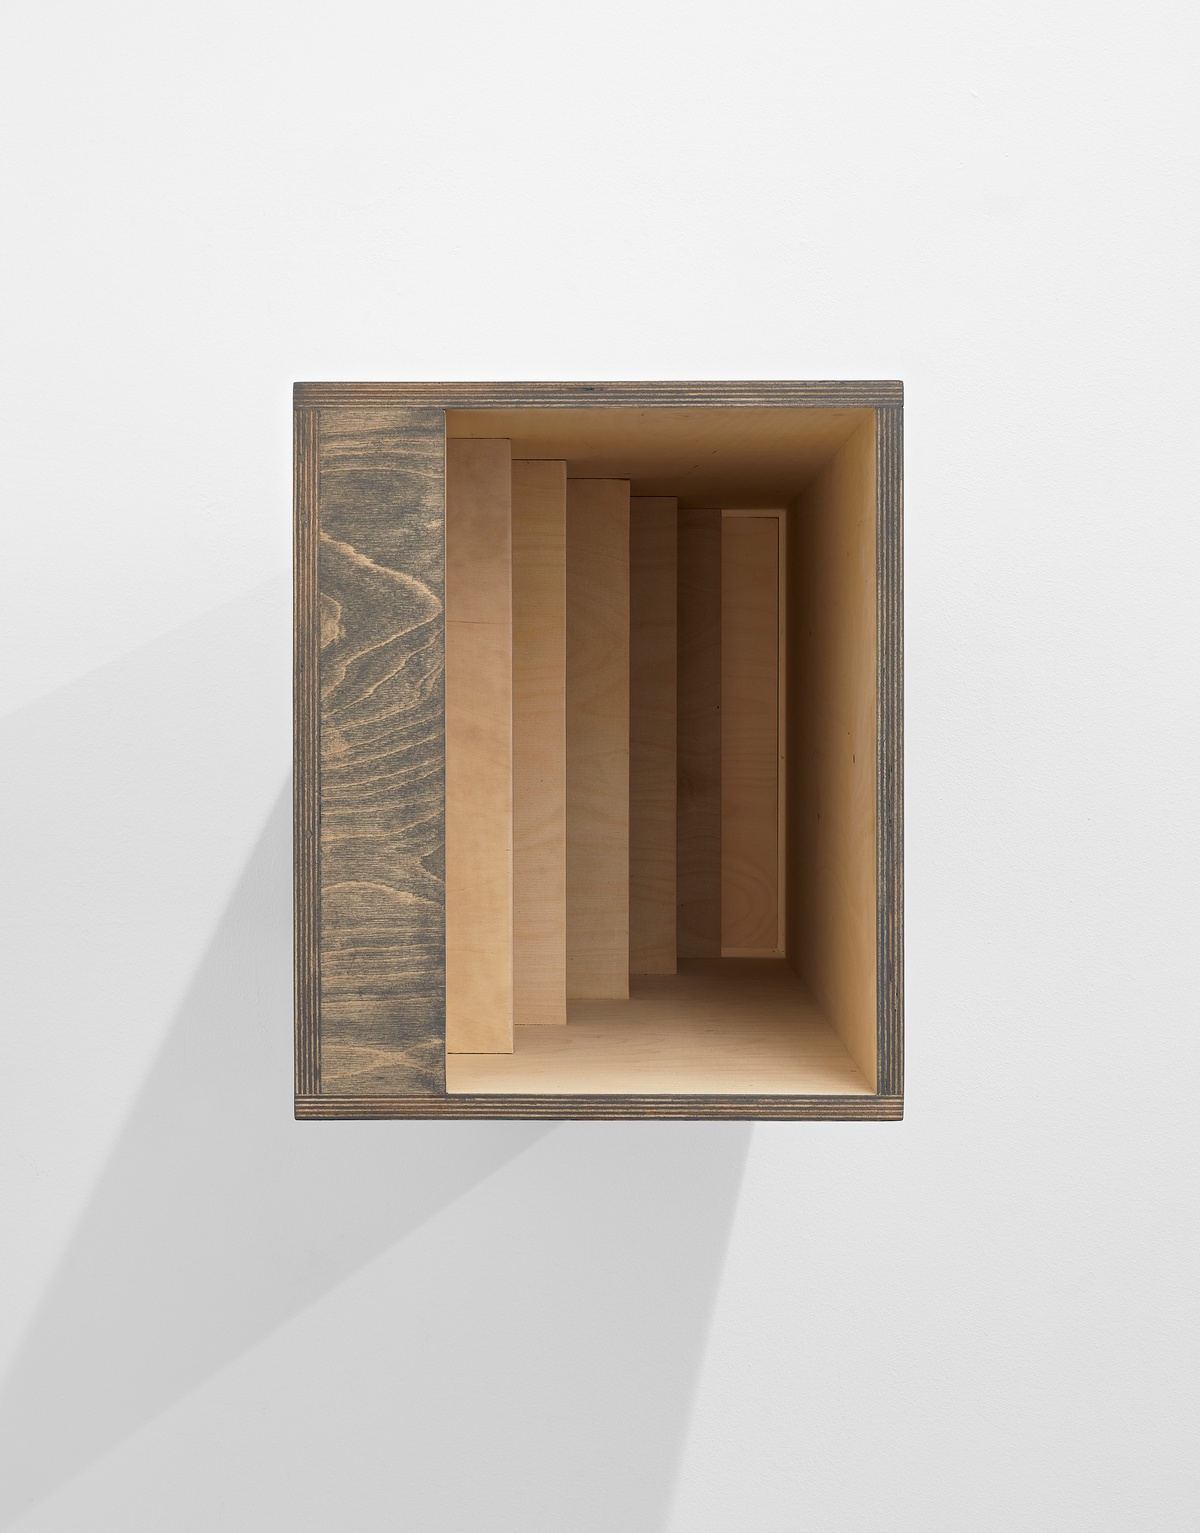 Richard Sides, The Conversation in an Invisible World, 2021wood, audio file, wireless speaker 40,5 x 33 x 90 cm